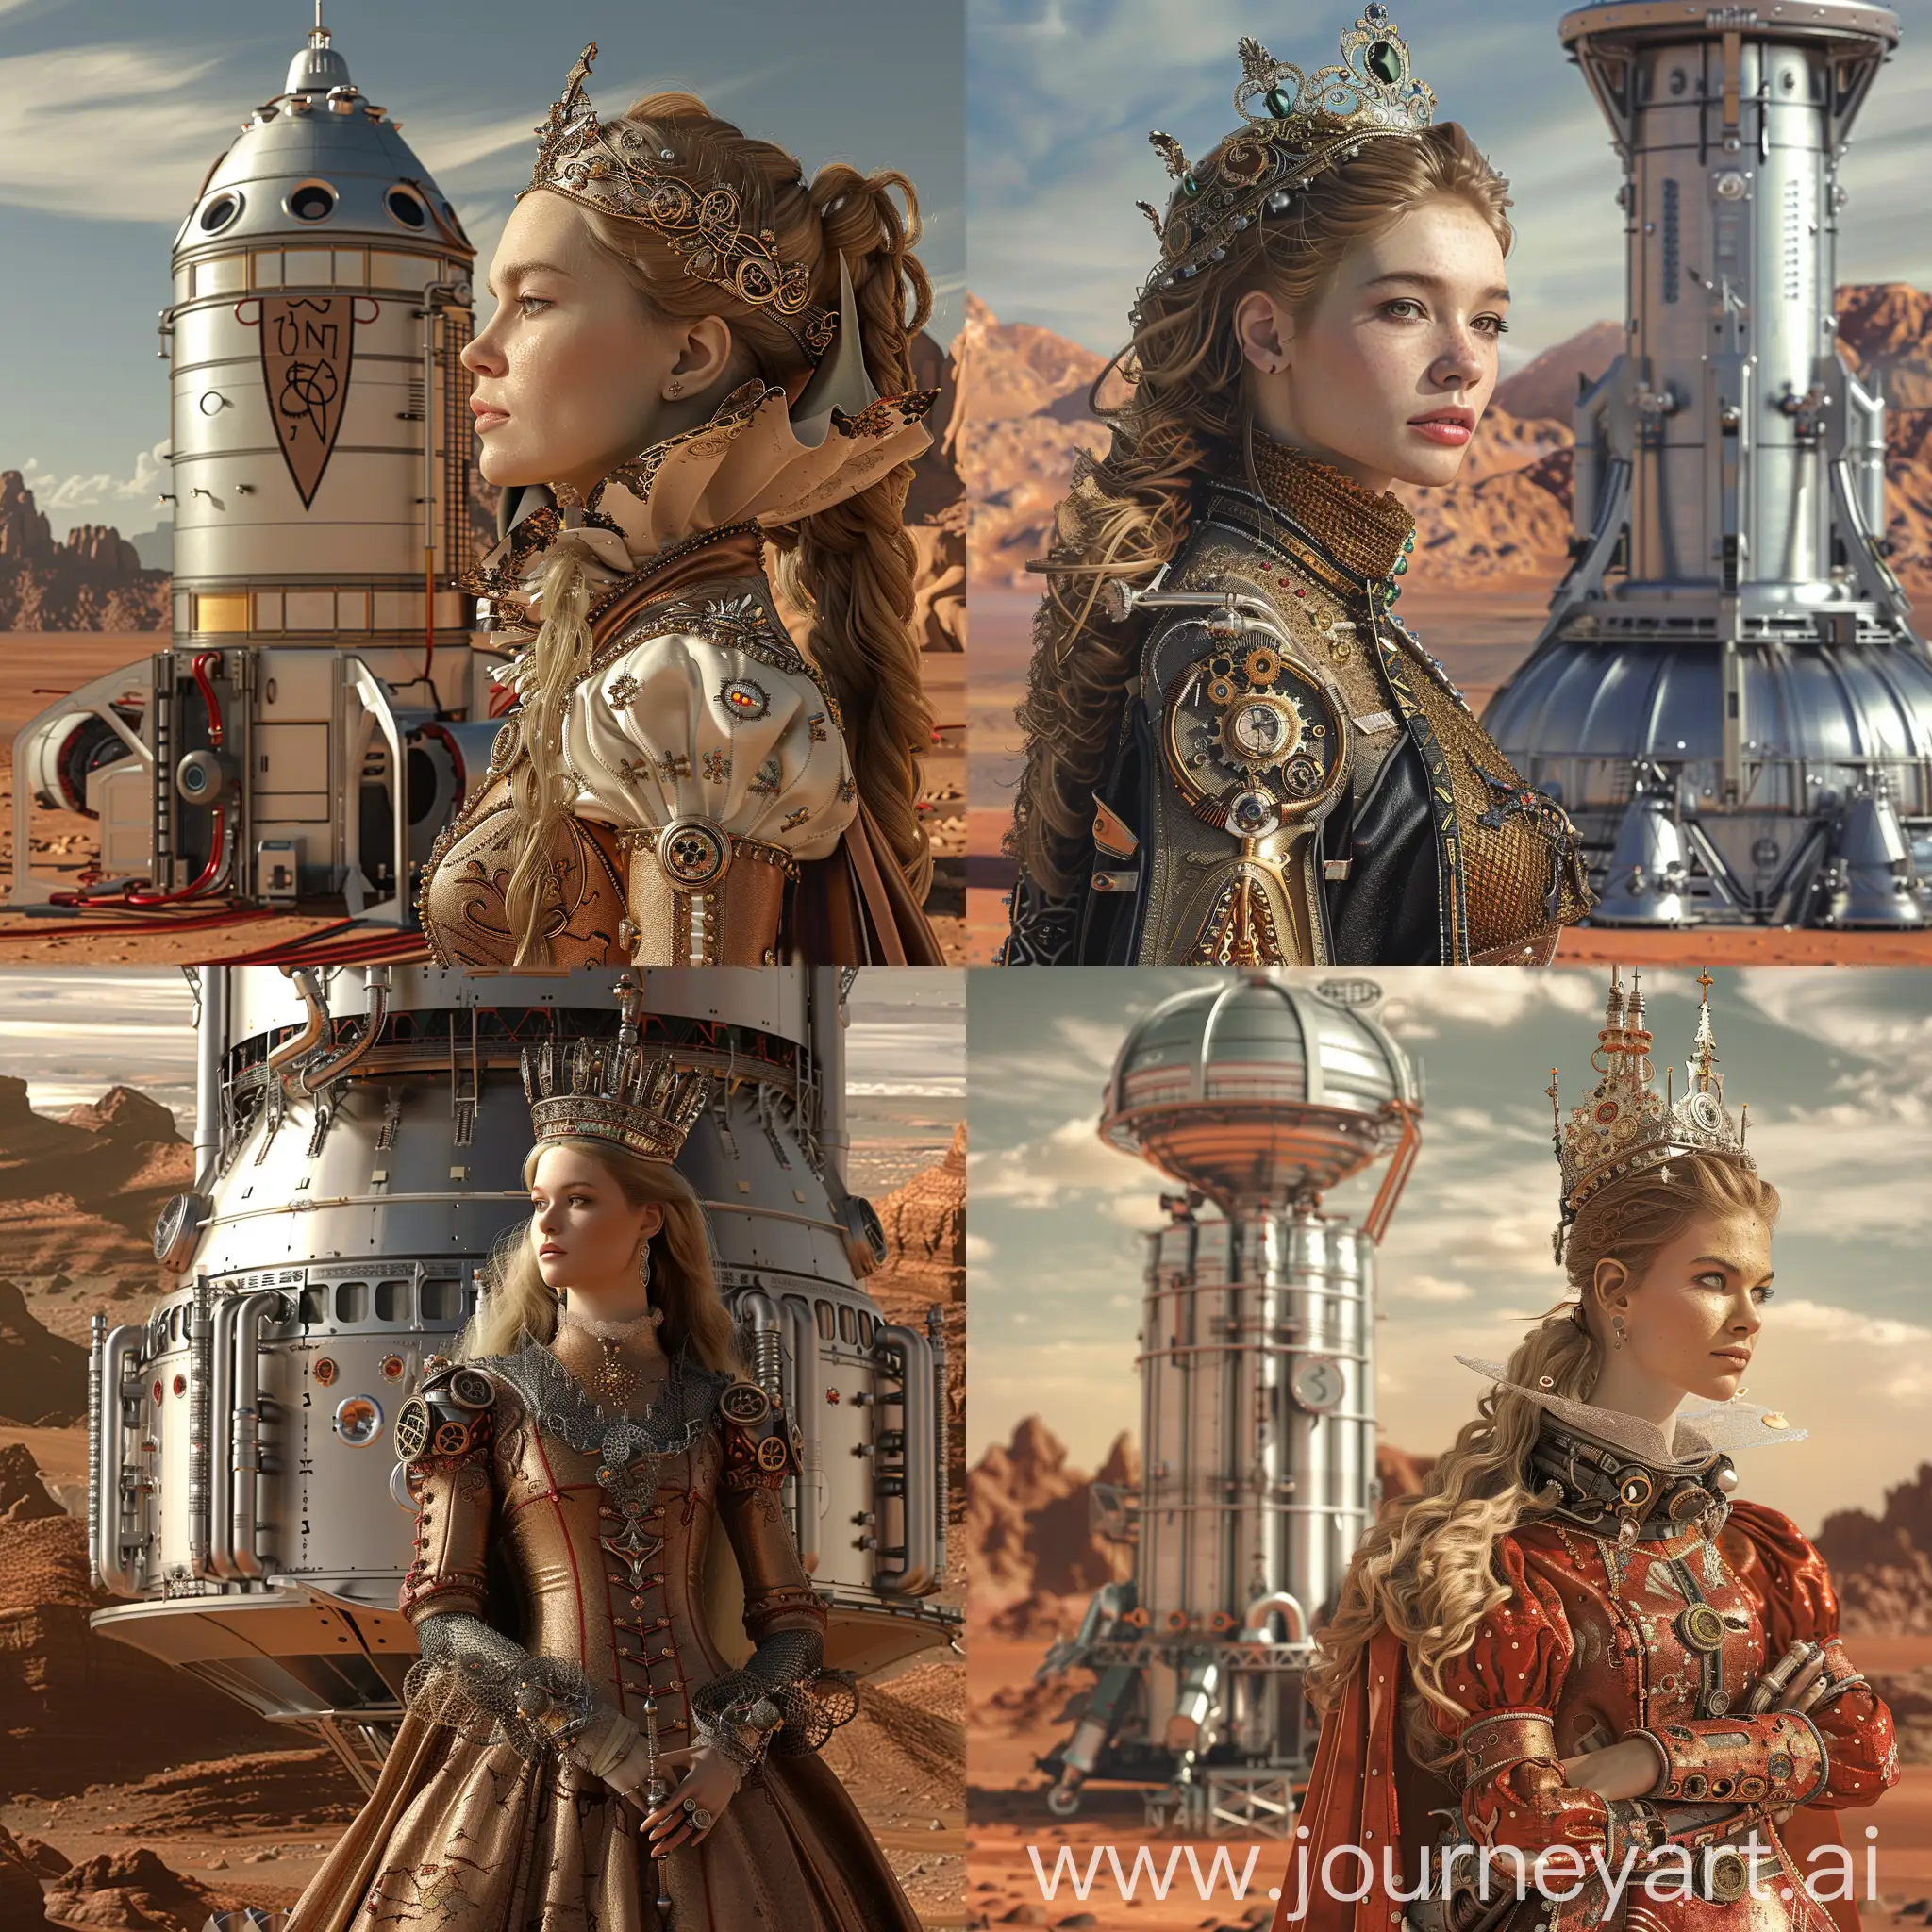 A highly detailed image of a beautiful mediaeval sci fi steampunk Queen infront of silver space station on mars